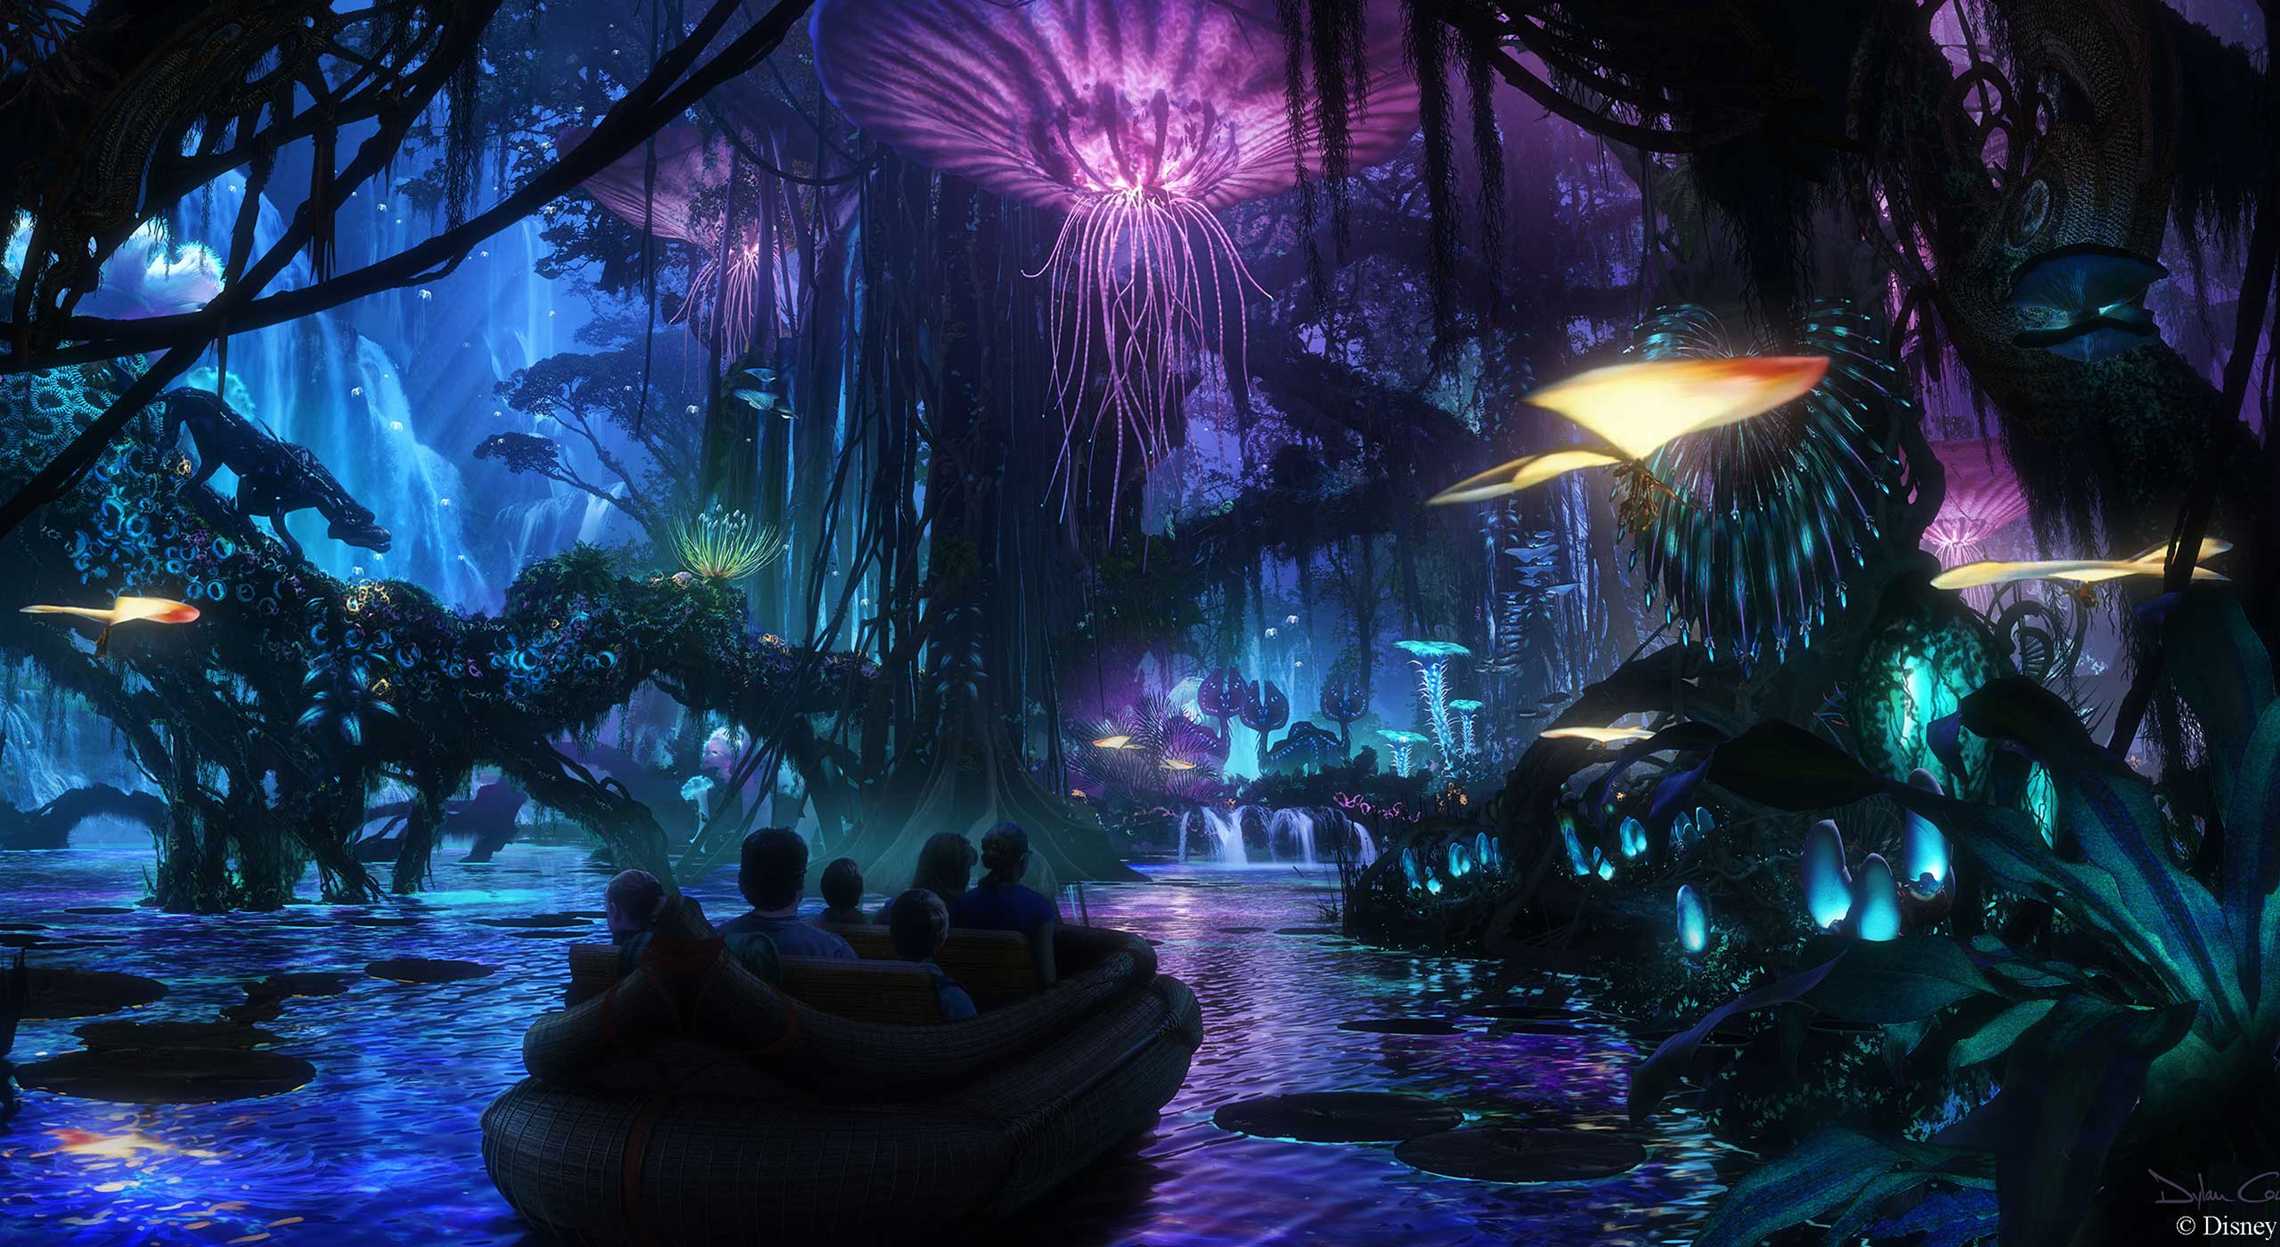 An animated adaptation of guests on a raft through Na'vi River Journey at Pandora - World of Avatar at Disney's Animal Kingdom Theme Park.